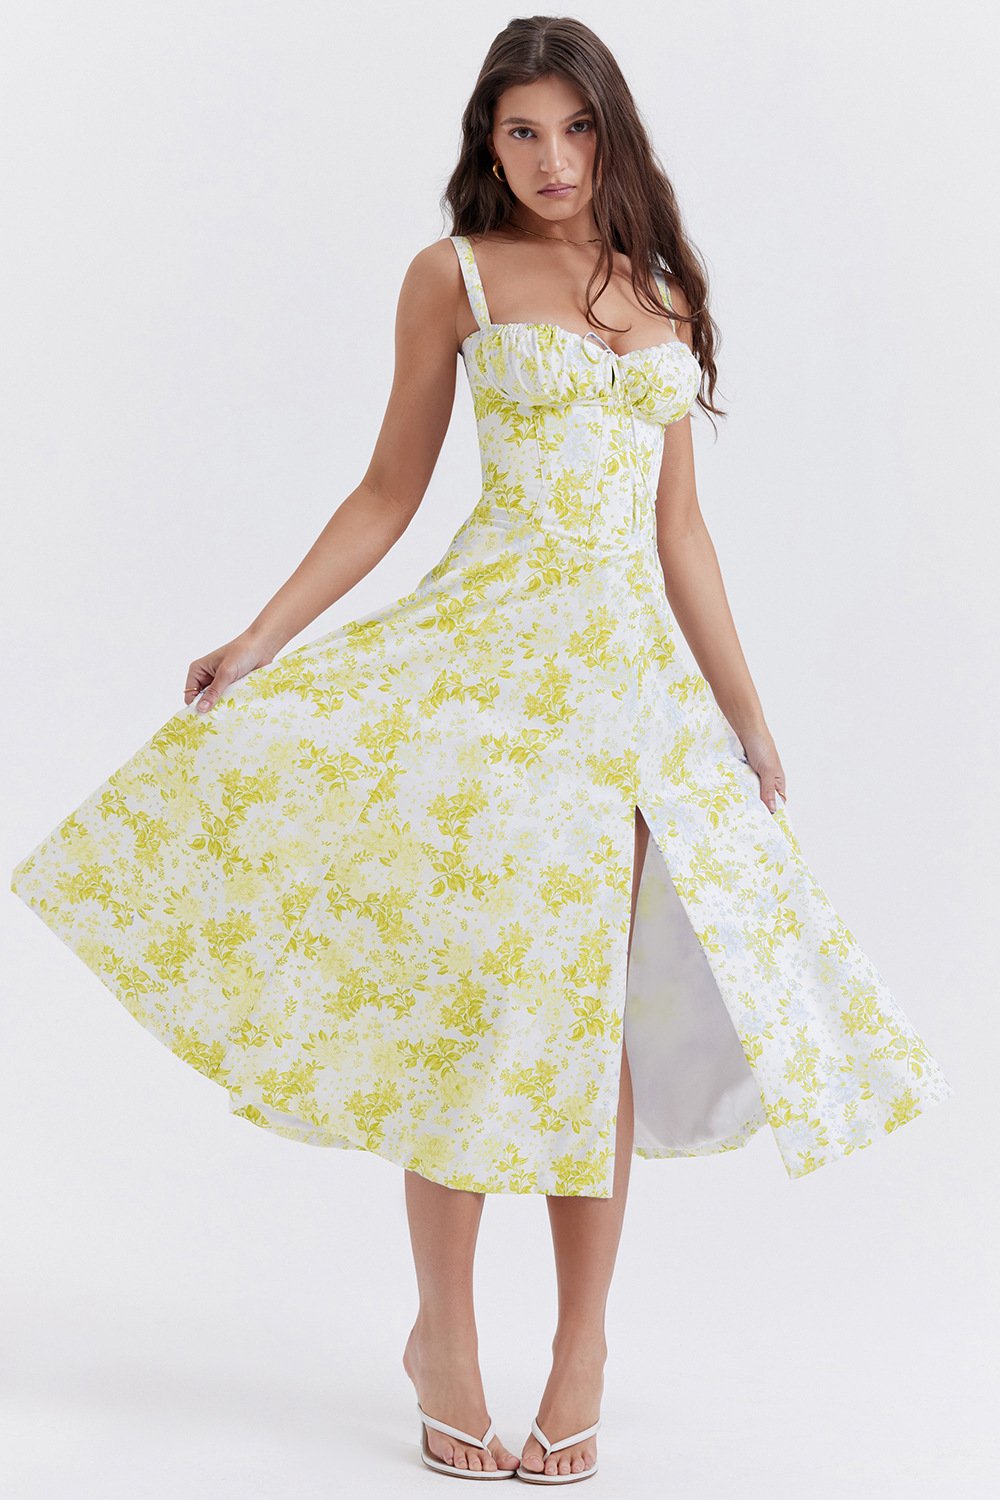 Stay Cool and Comfortable with Our Print Bustier Sundress - 40% Off!ss